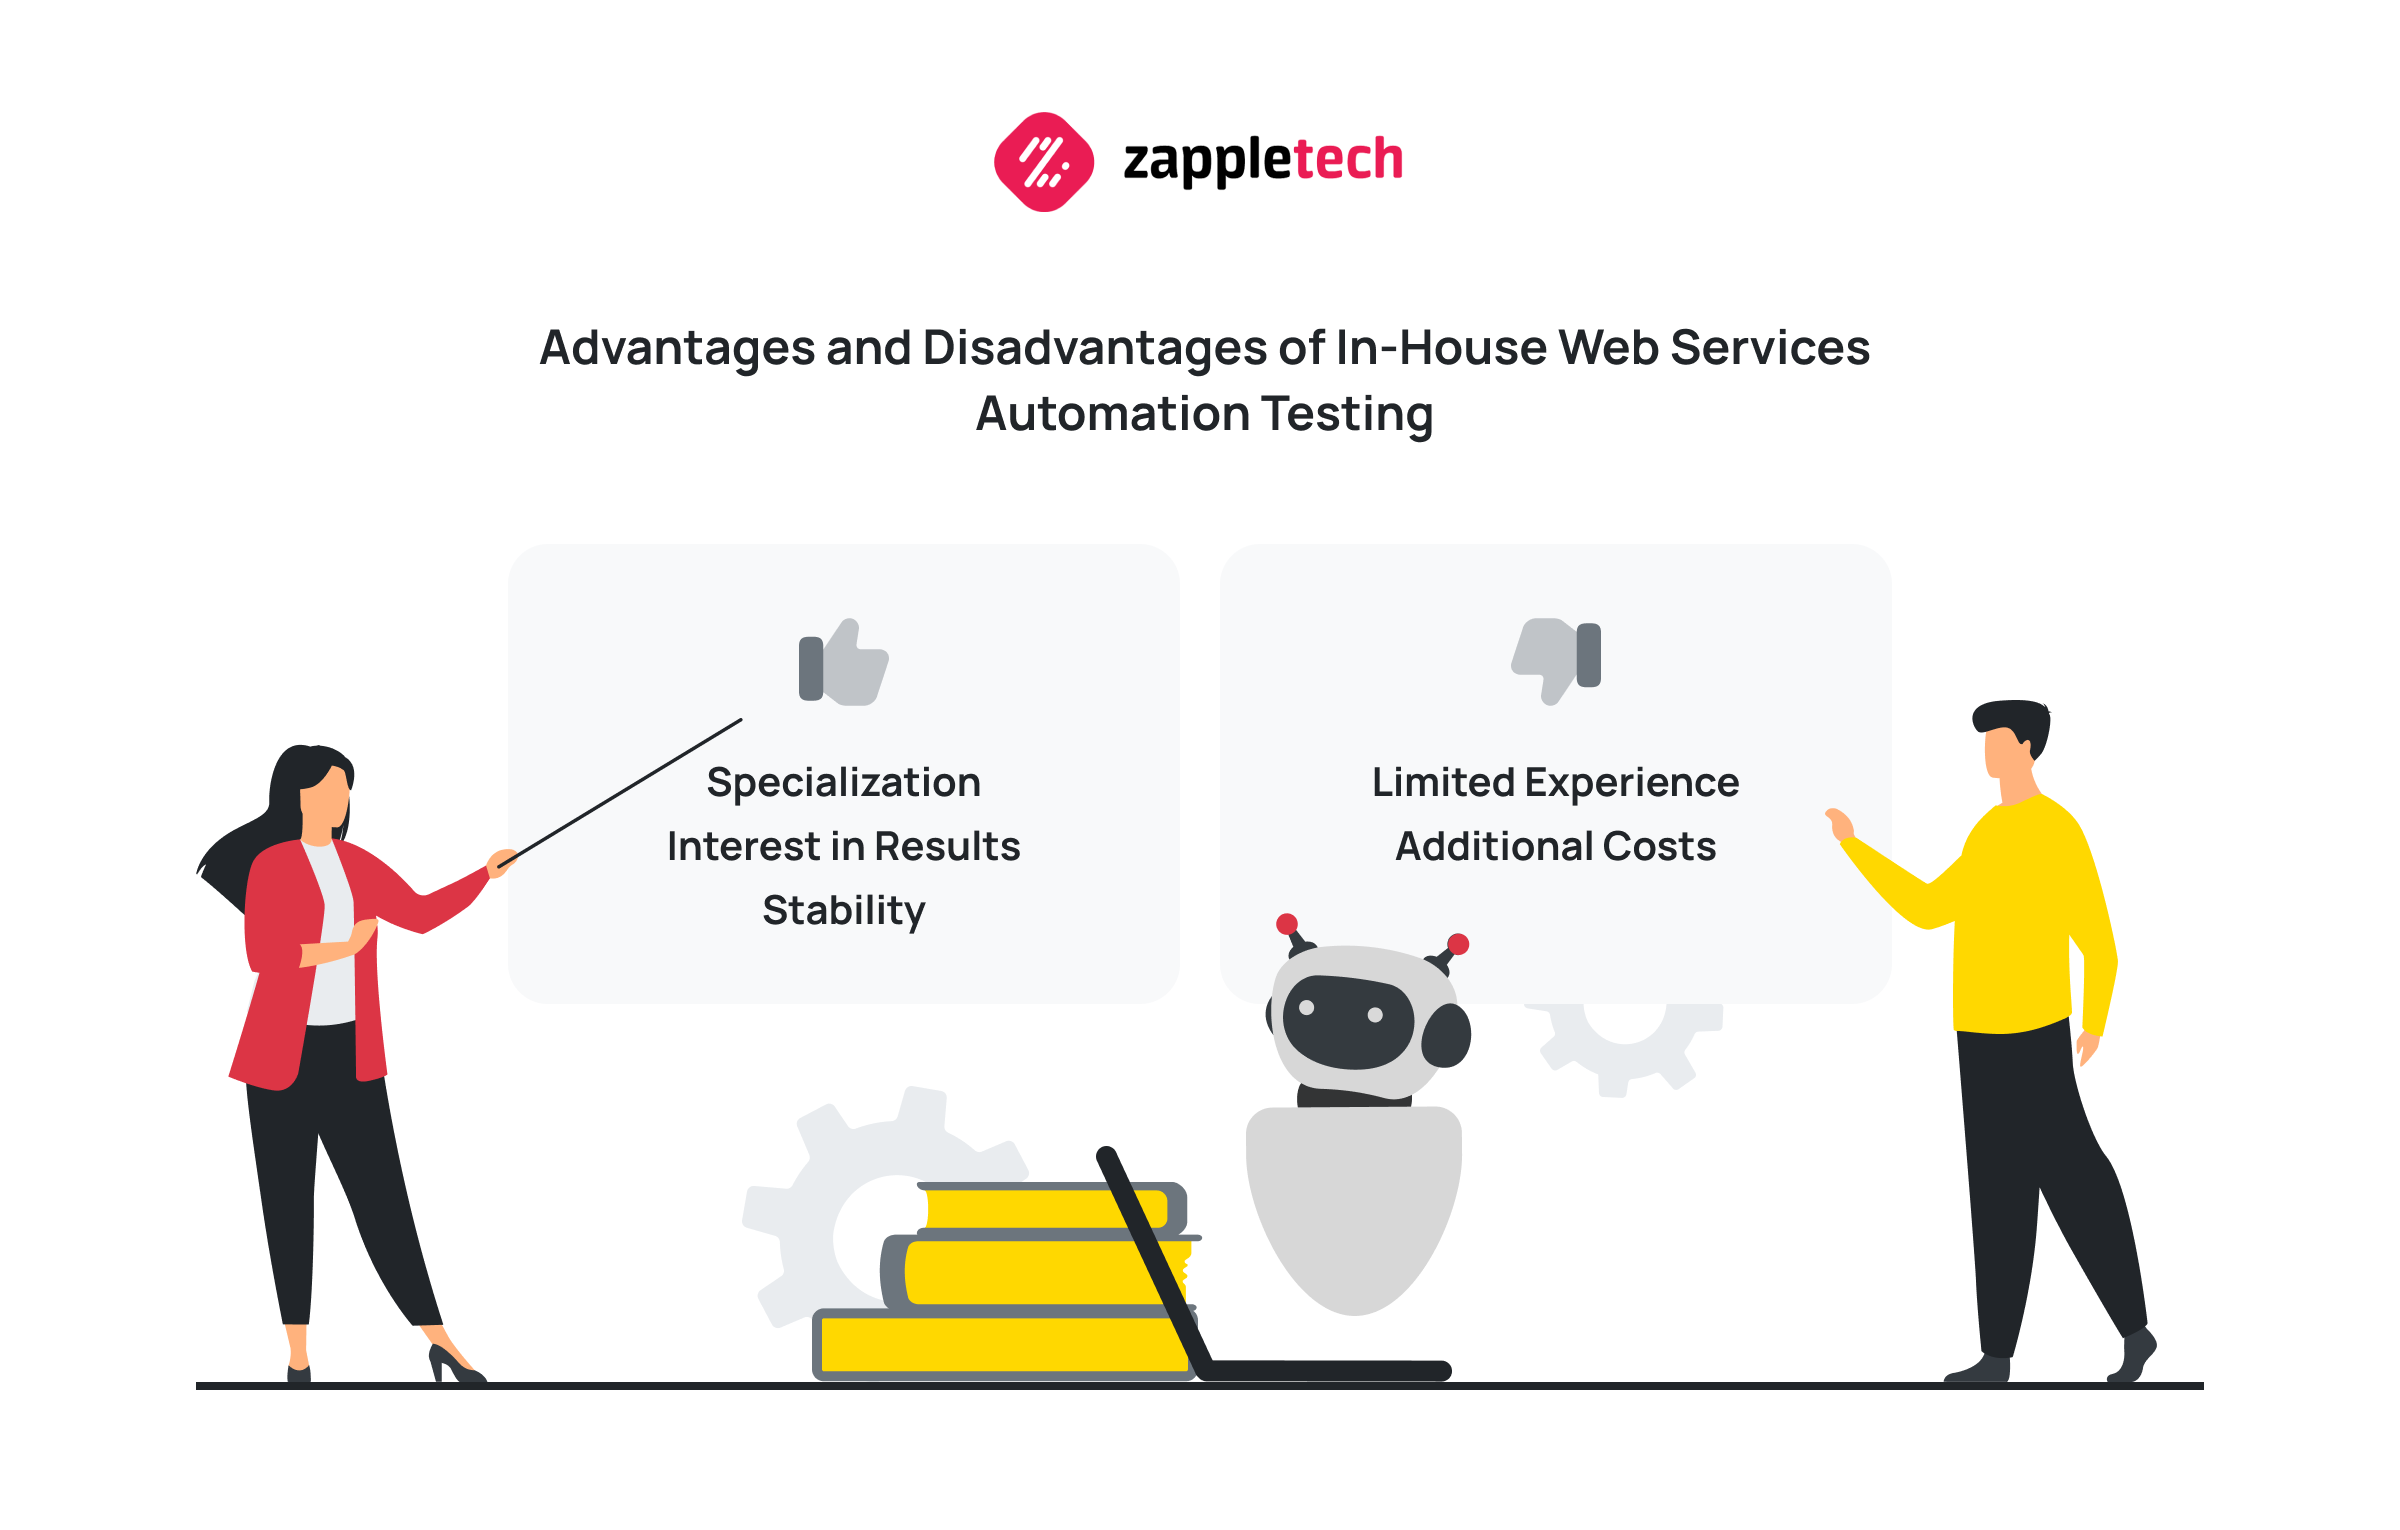 Advantages and Disadvantages of In-House Web Services Automation Testing